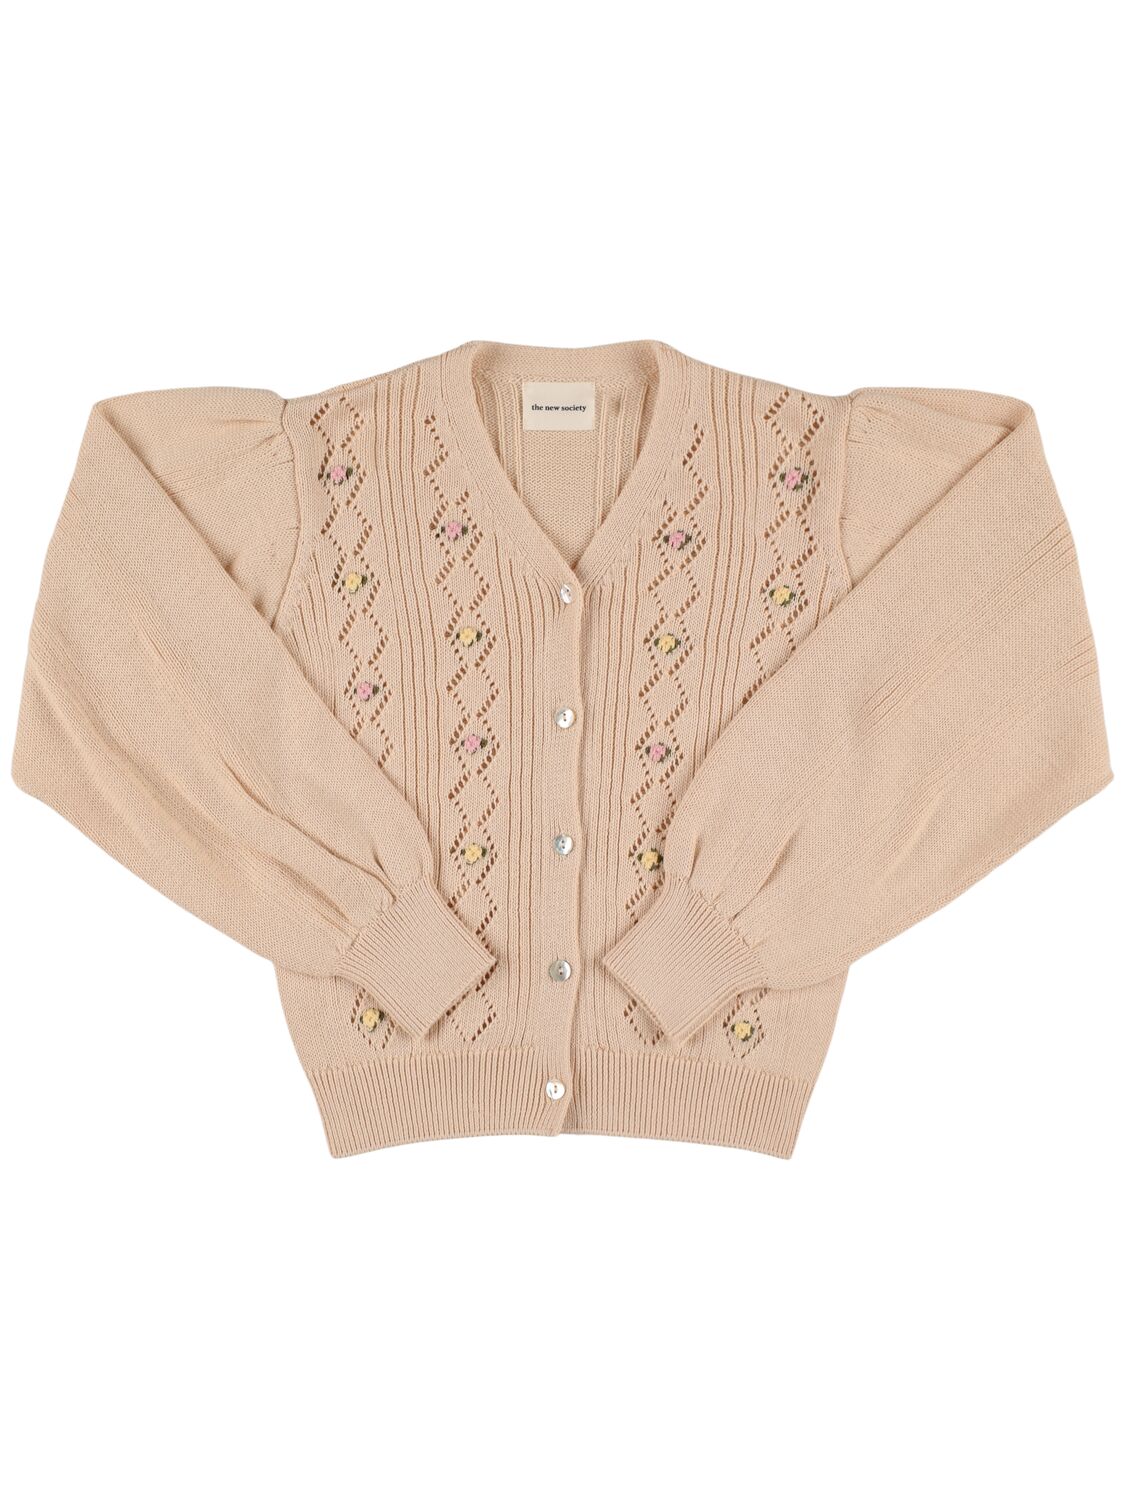 The New Society Kids' Organic Cotton Knit Cardigan In Beige